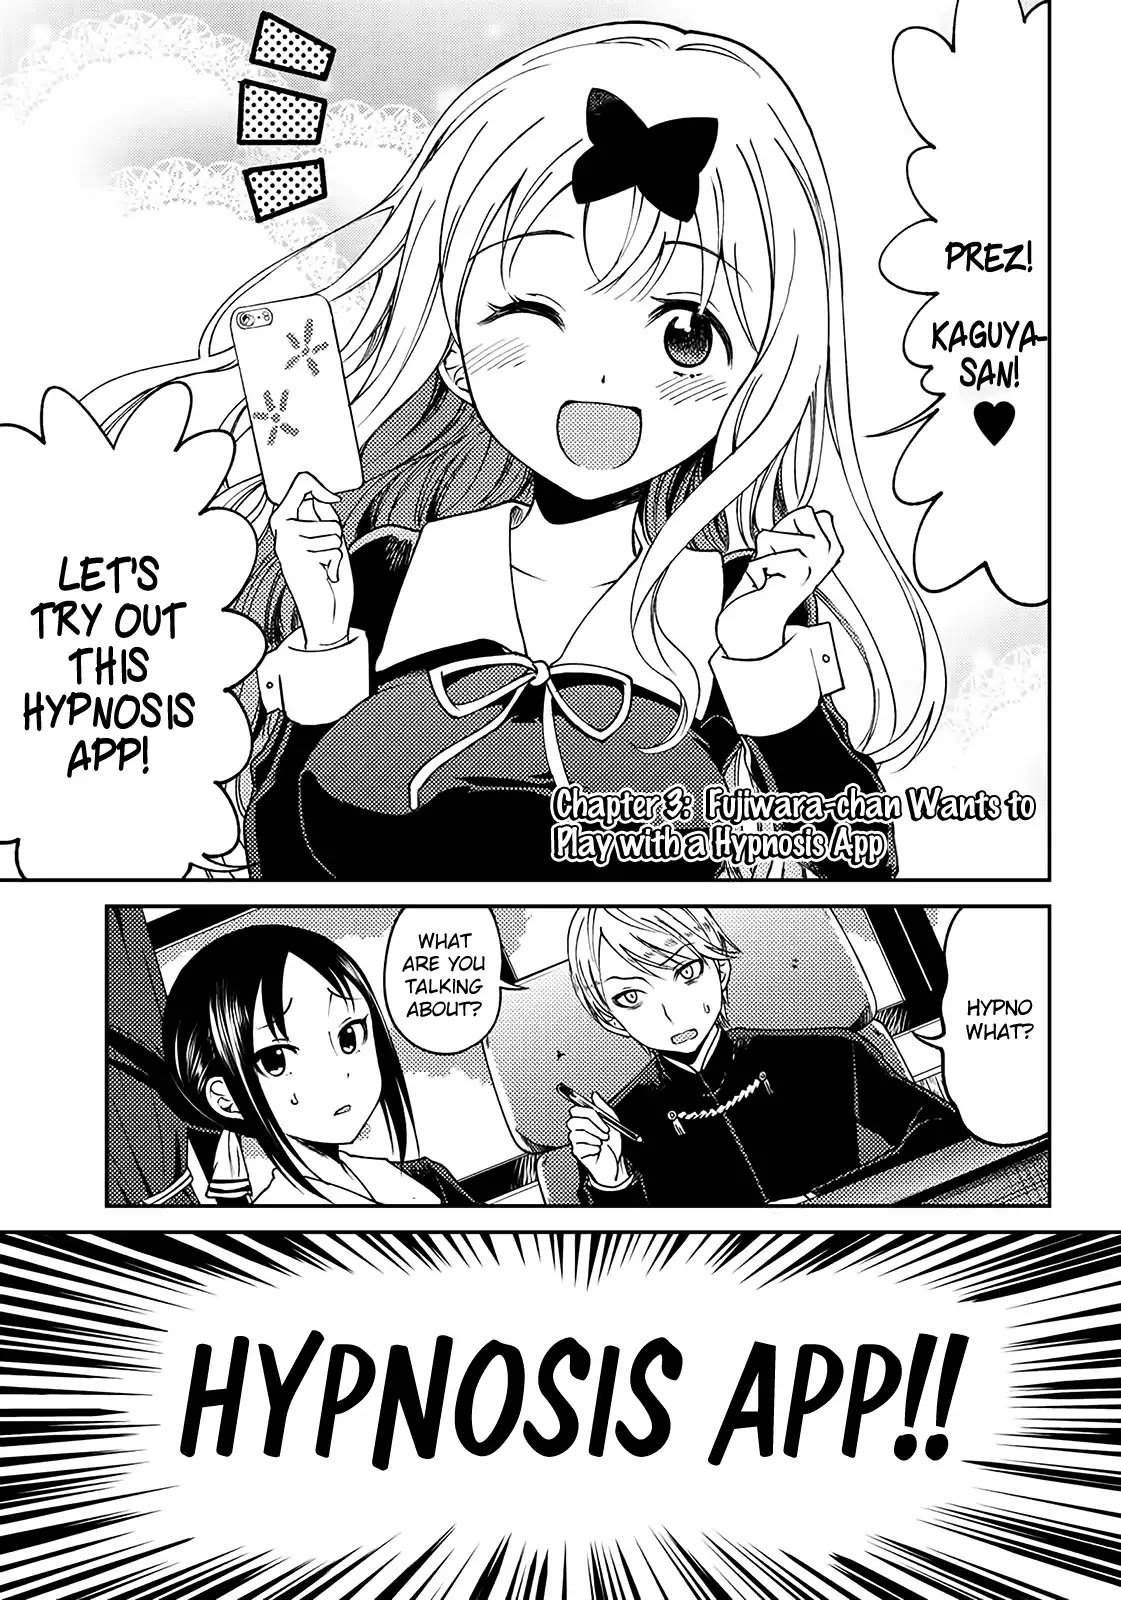 kaguya-wants-to-be-confessed-to-official-doujin-chap-3-1